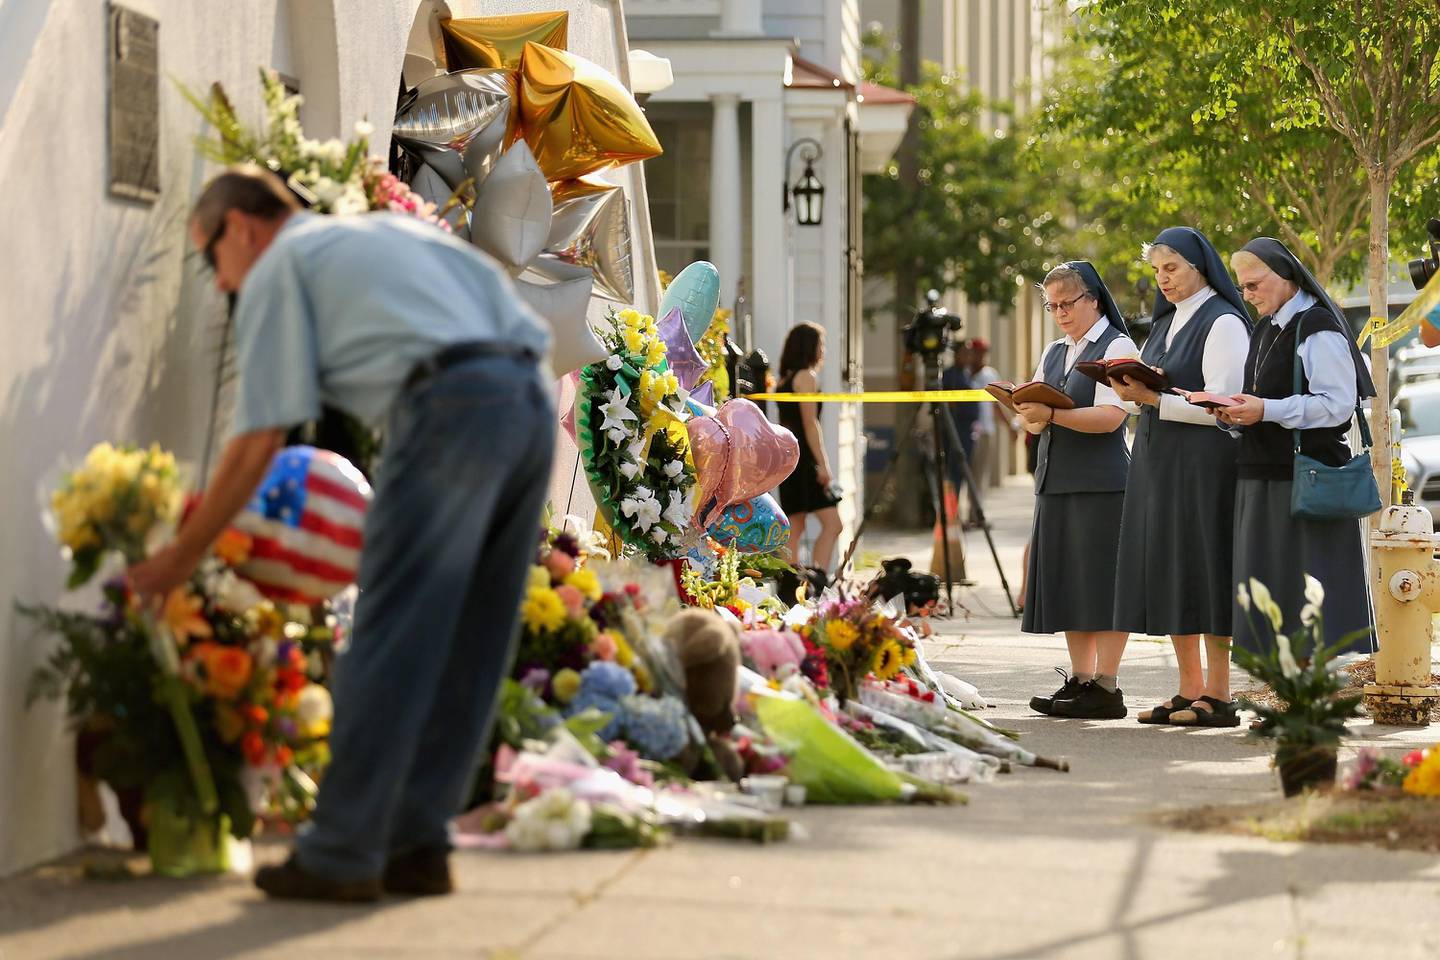 CHARLESTON, SC - JUNE 19: (L-R) Sisters Margaret Kerry, Mary Thecla and Kathleen Lang of the Order of the Daughters of St. Paul pray outside the historic Emanuel African Methodist Episcopal Church June 19, 2015 in Charleston, South Carolina. South Carolina Governor Nikki Haley called for the death penalty for Dylann Storm Roof, 21, of Lexington, South Carolina, if he is found guilty of murdering nine people during a prayer meeting at the church Wednesday night. Among the dead is the Rev. Clementa Pinckney, the pastor of the church which, according to the National Park Service, is the oldest black congregation in America south of Baltimore.   Chip Somodevilla/Getty Images/AFP
== FOR NEWSPAPERS, INTERNET, TELCOS & TELEVISION USE ONLY ==